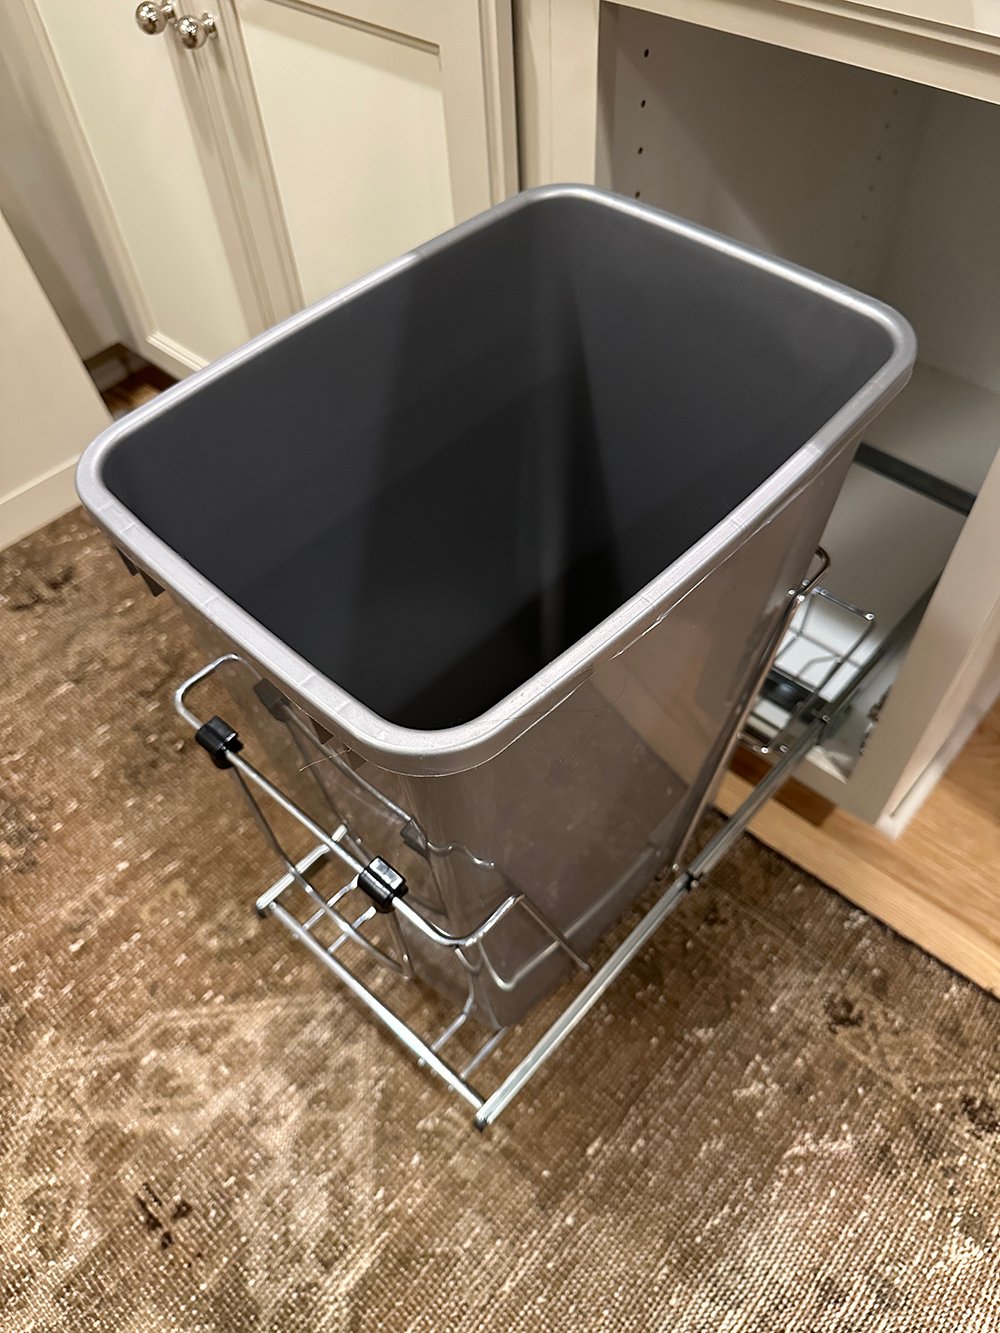 How to Install a Hidden Kitchen Trash Can - roomfortuesday.com